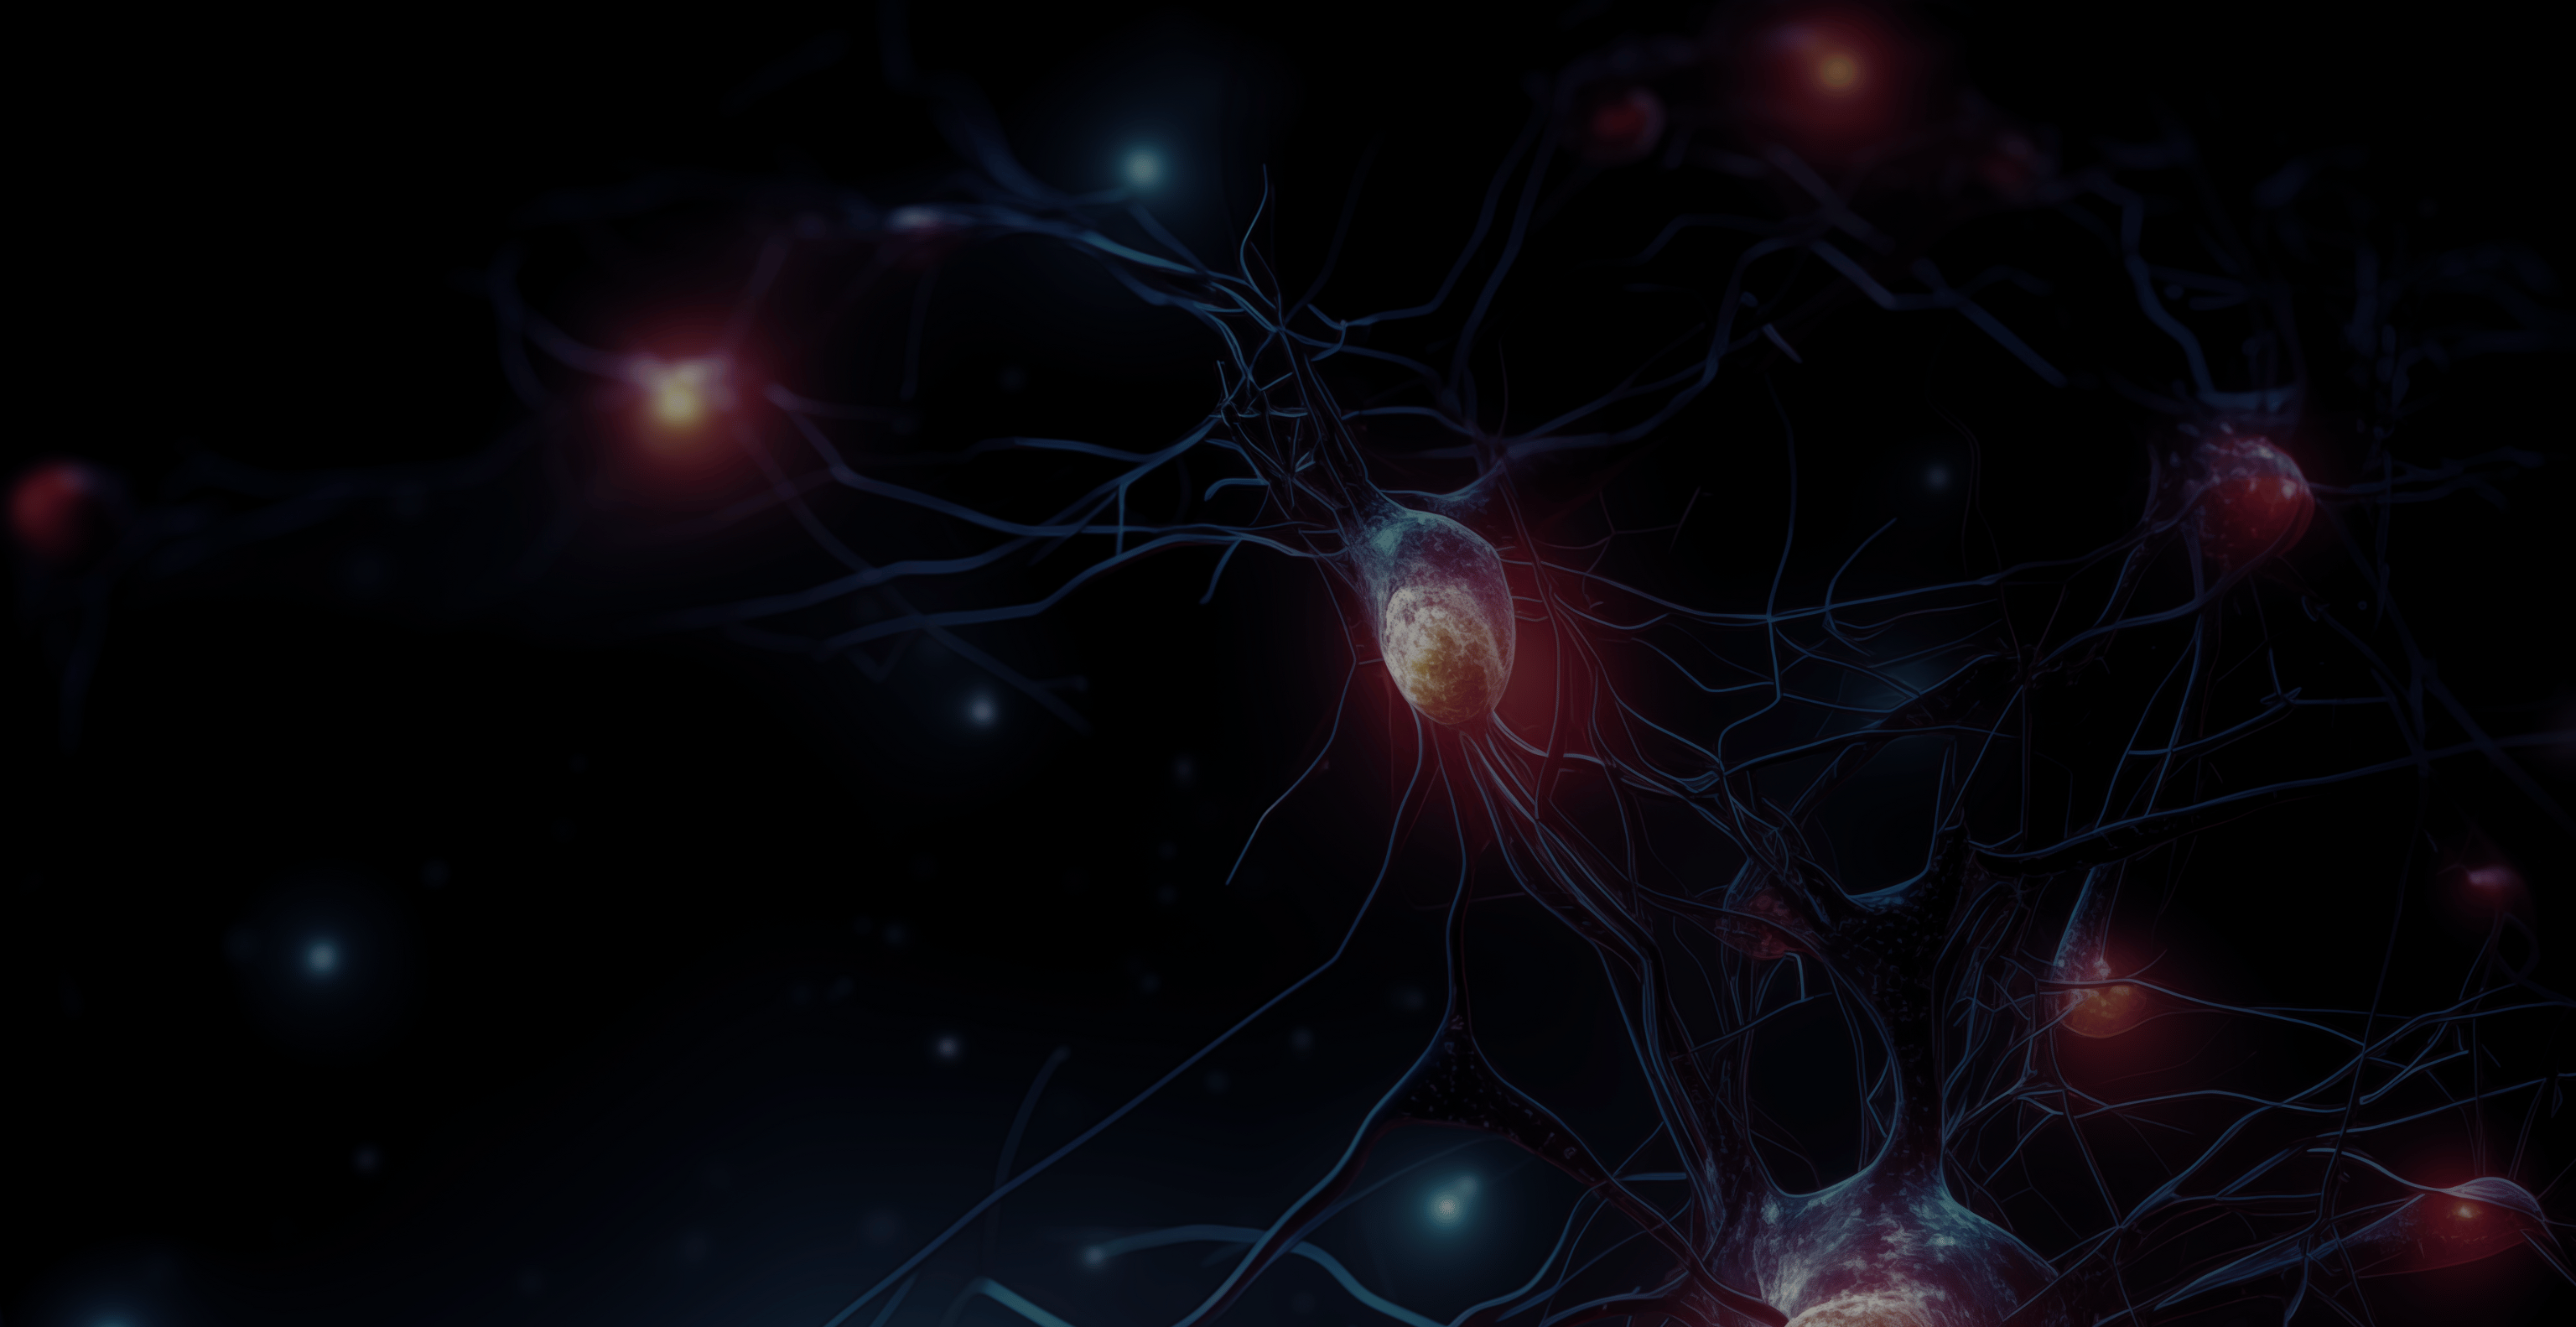 Image of artificial neurons